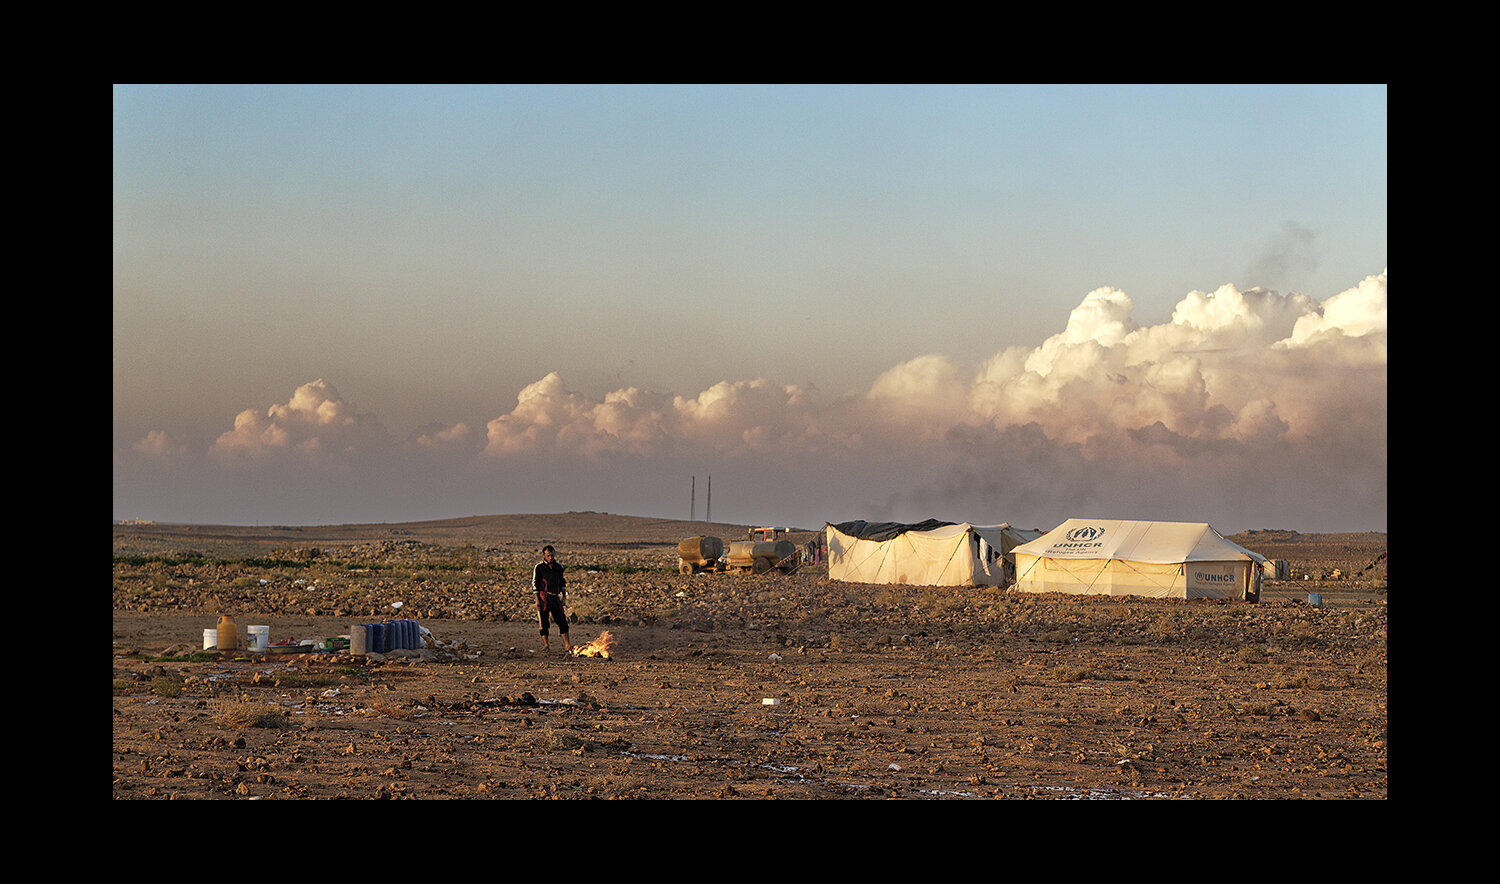  A refugee stands over a fire in an isolated enclave of tents in the desert of Ereinbeh, Jordan. 2013 